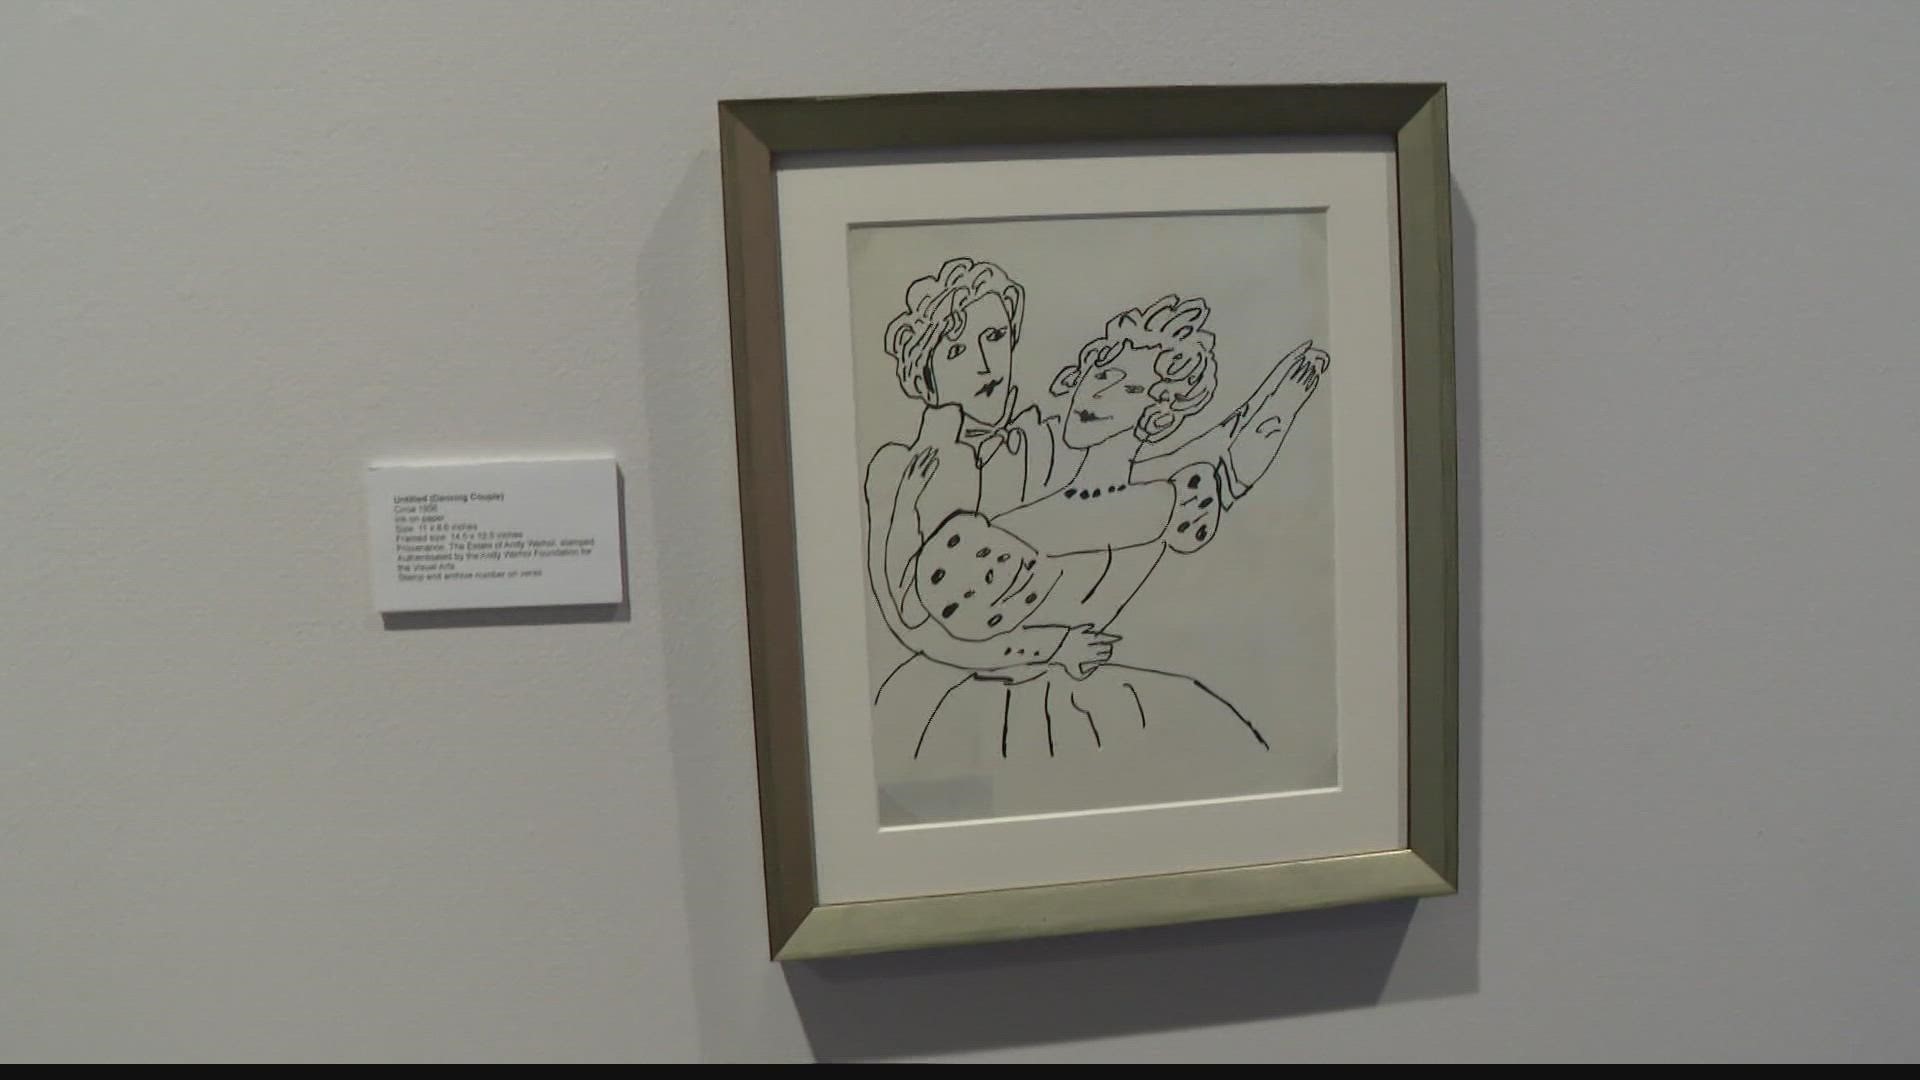 An Indy art gallery is showing off some exclusive artwork from iconic artist Andy Warhol.